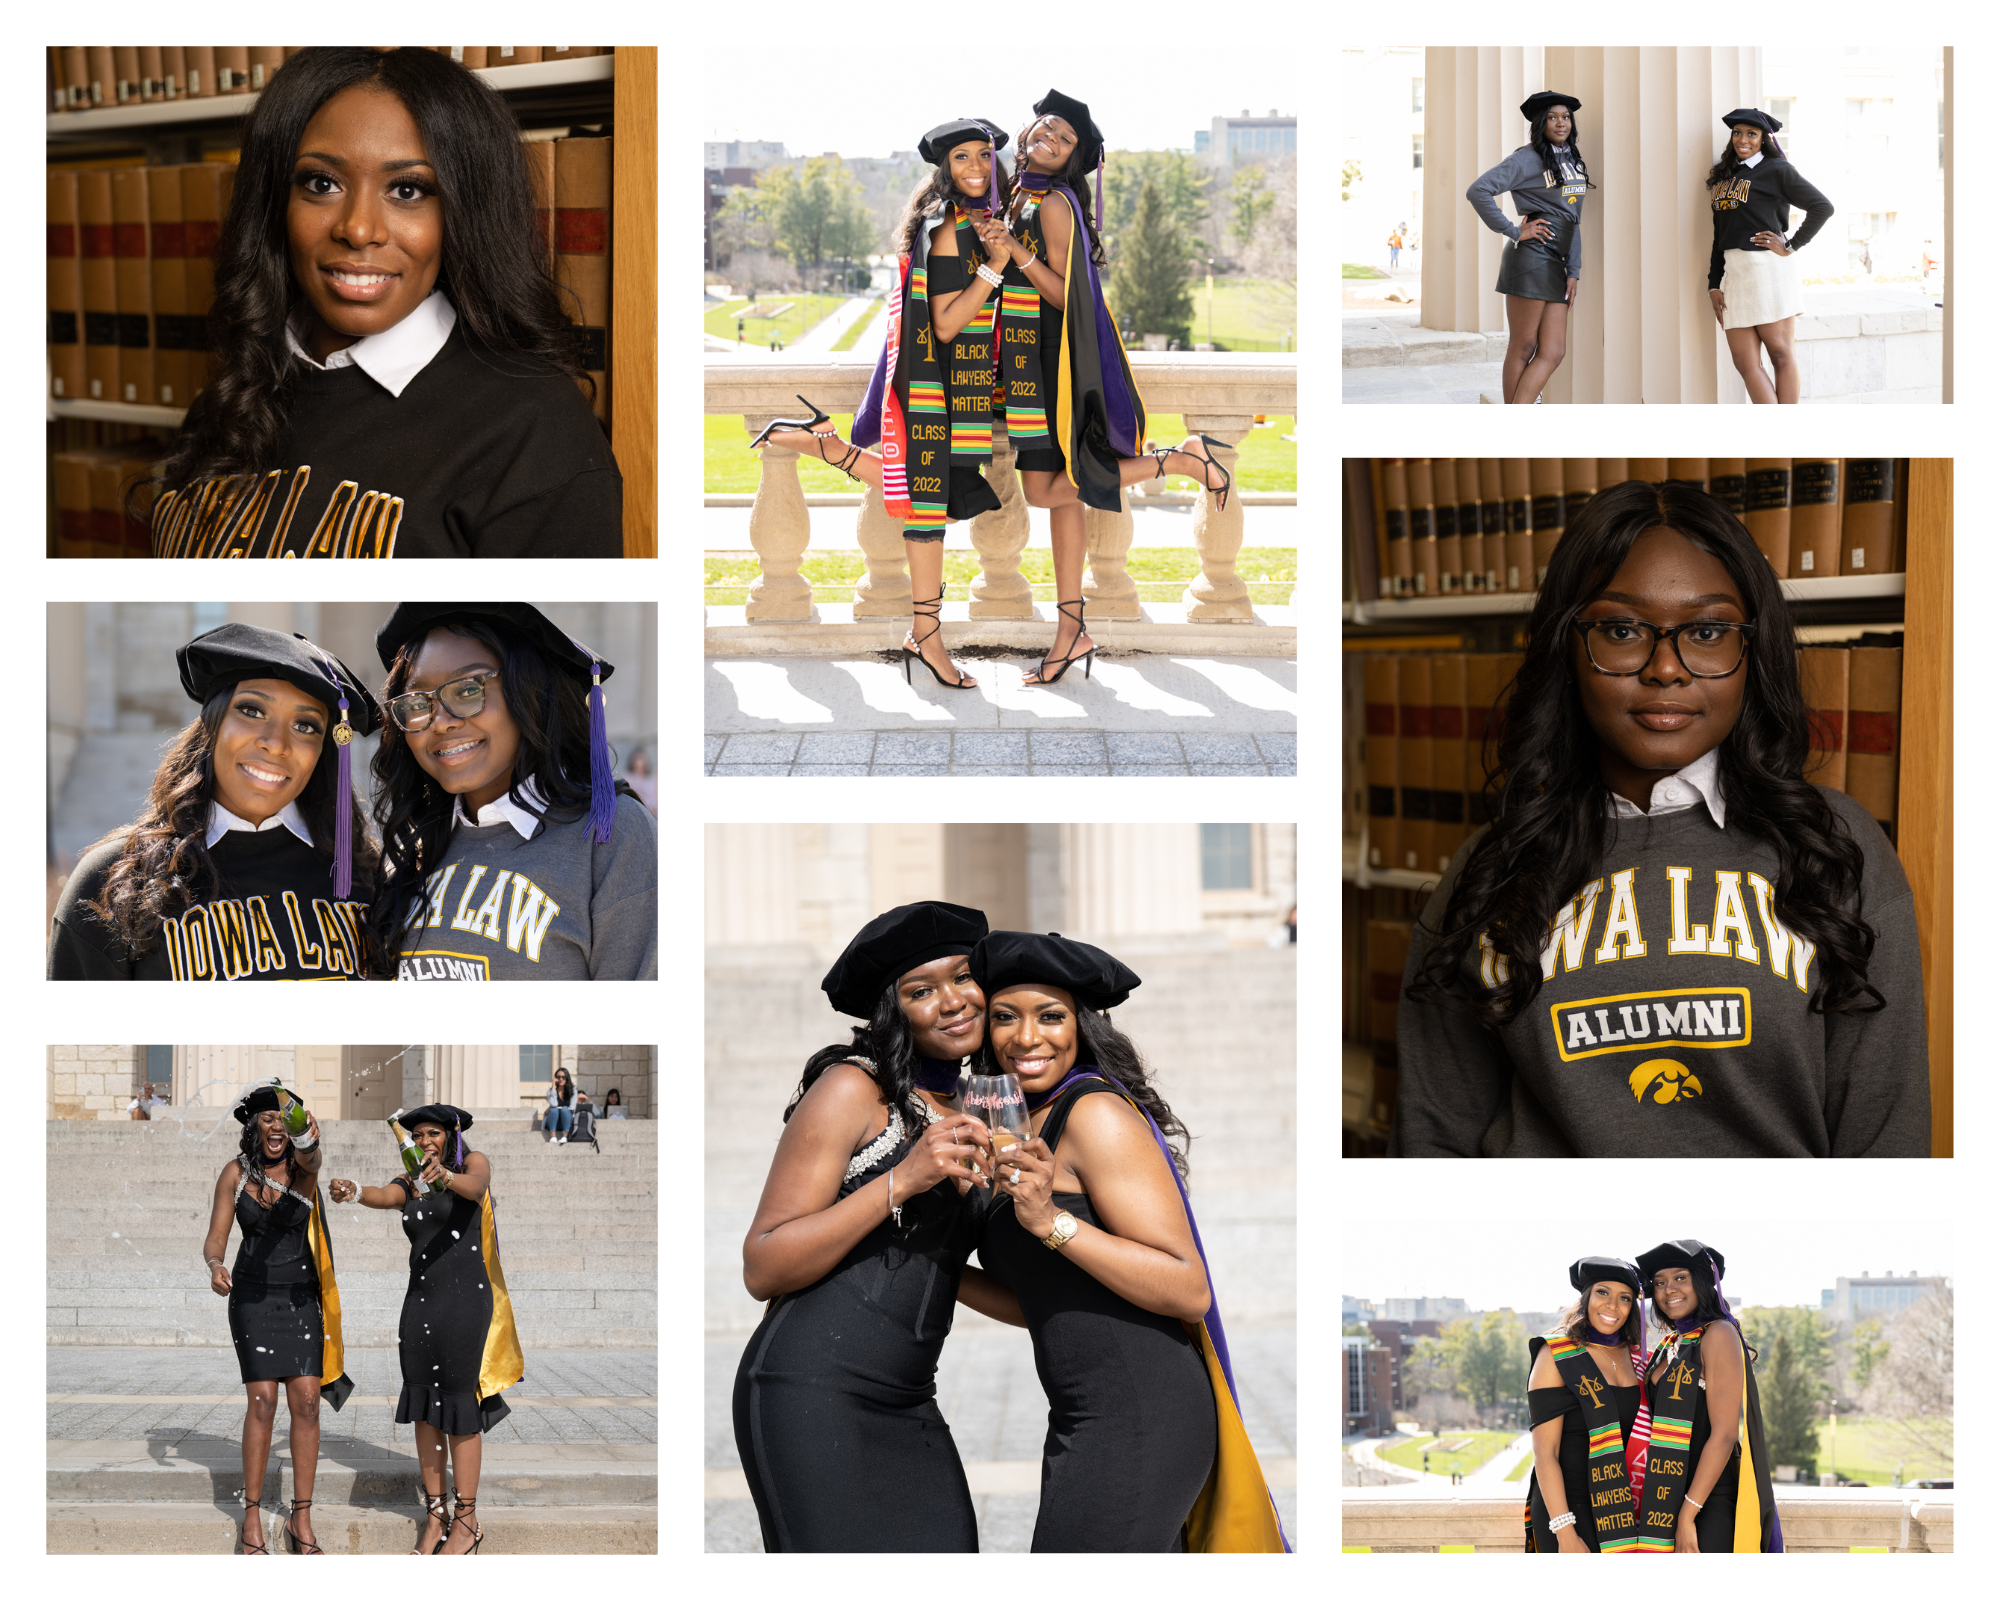 Efe and Alexis pose for University of Iowa College Graduation pics on campus and in the Law building wearing graduation gowns with dresses underneath and Iowa Law sweatshirts.